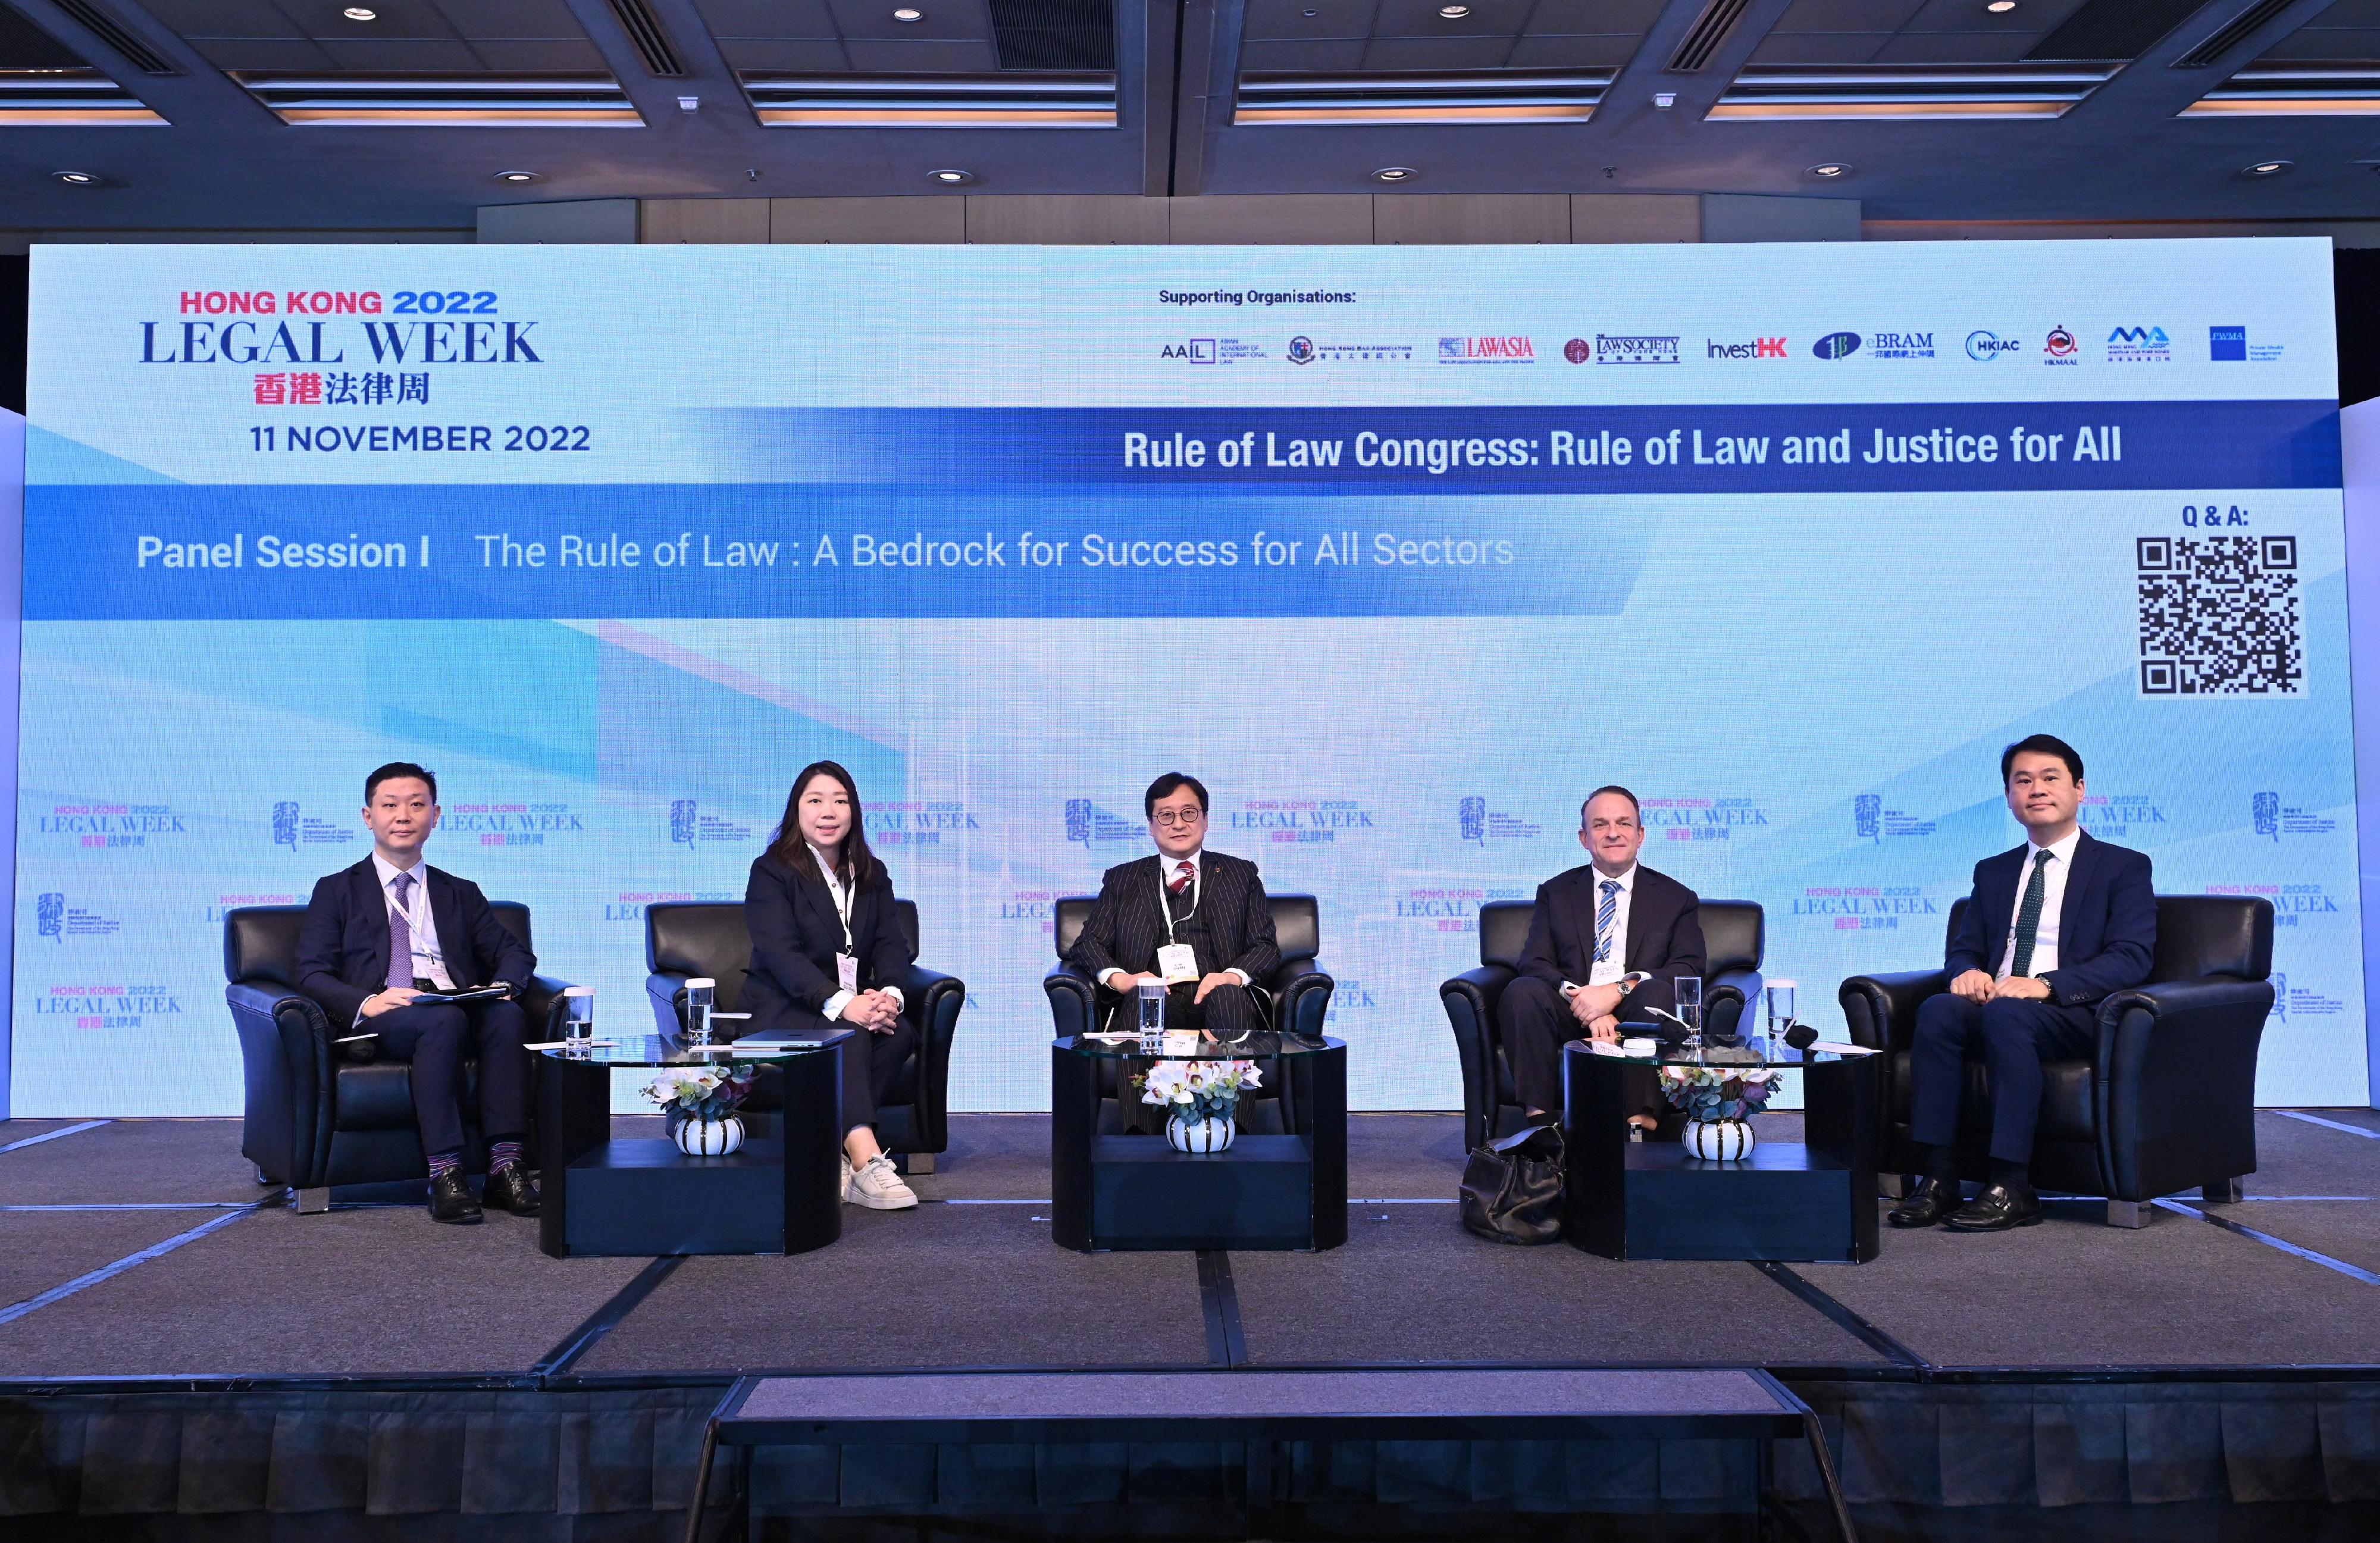 The five-day Hong Kong Legal Week 2022, an annual flagship event of the Department of Justice, successfully concluded today (November 11). Photo shows (from left) Partner, Haiwen & Partners LLP, and Principal Representative of the China Liaison Office of the International Chamber of Shipping, Mr Edward Liu; Founder and CEO of Ora-Ora and Co-Founder & President Emeritus of the Hong Kong Art Gallery Association, Dr Henrietta Tsui-Leung; the President of the Law Society of Hong Kong, Mr Chan Chak-ming; Partner of King & Wood Mallesons Mr Paul Starr; and the Head of Financial Services and Global Head of Family Office of Invest Hong Kong, Mr Dixon Wong, at panel session 1 on The Rule of Law: A Bedrock for Success for All Sectors at Rule of Law Congress: Rule of Law and Justice for All.